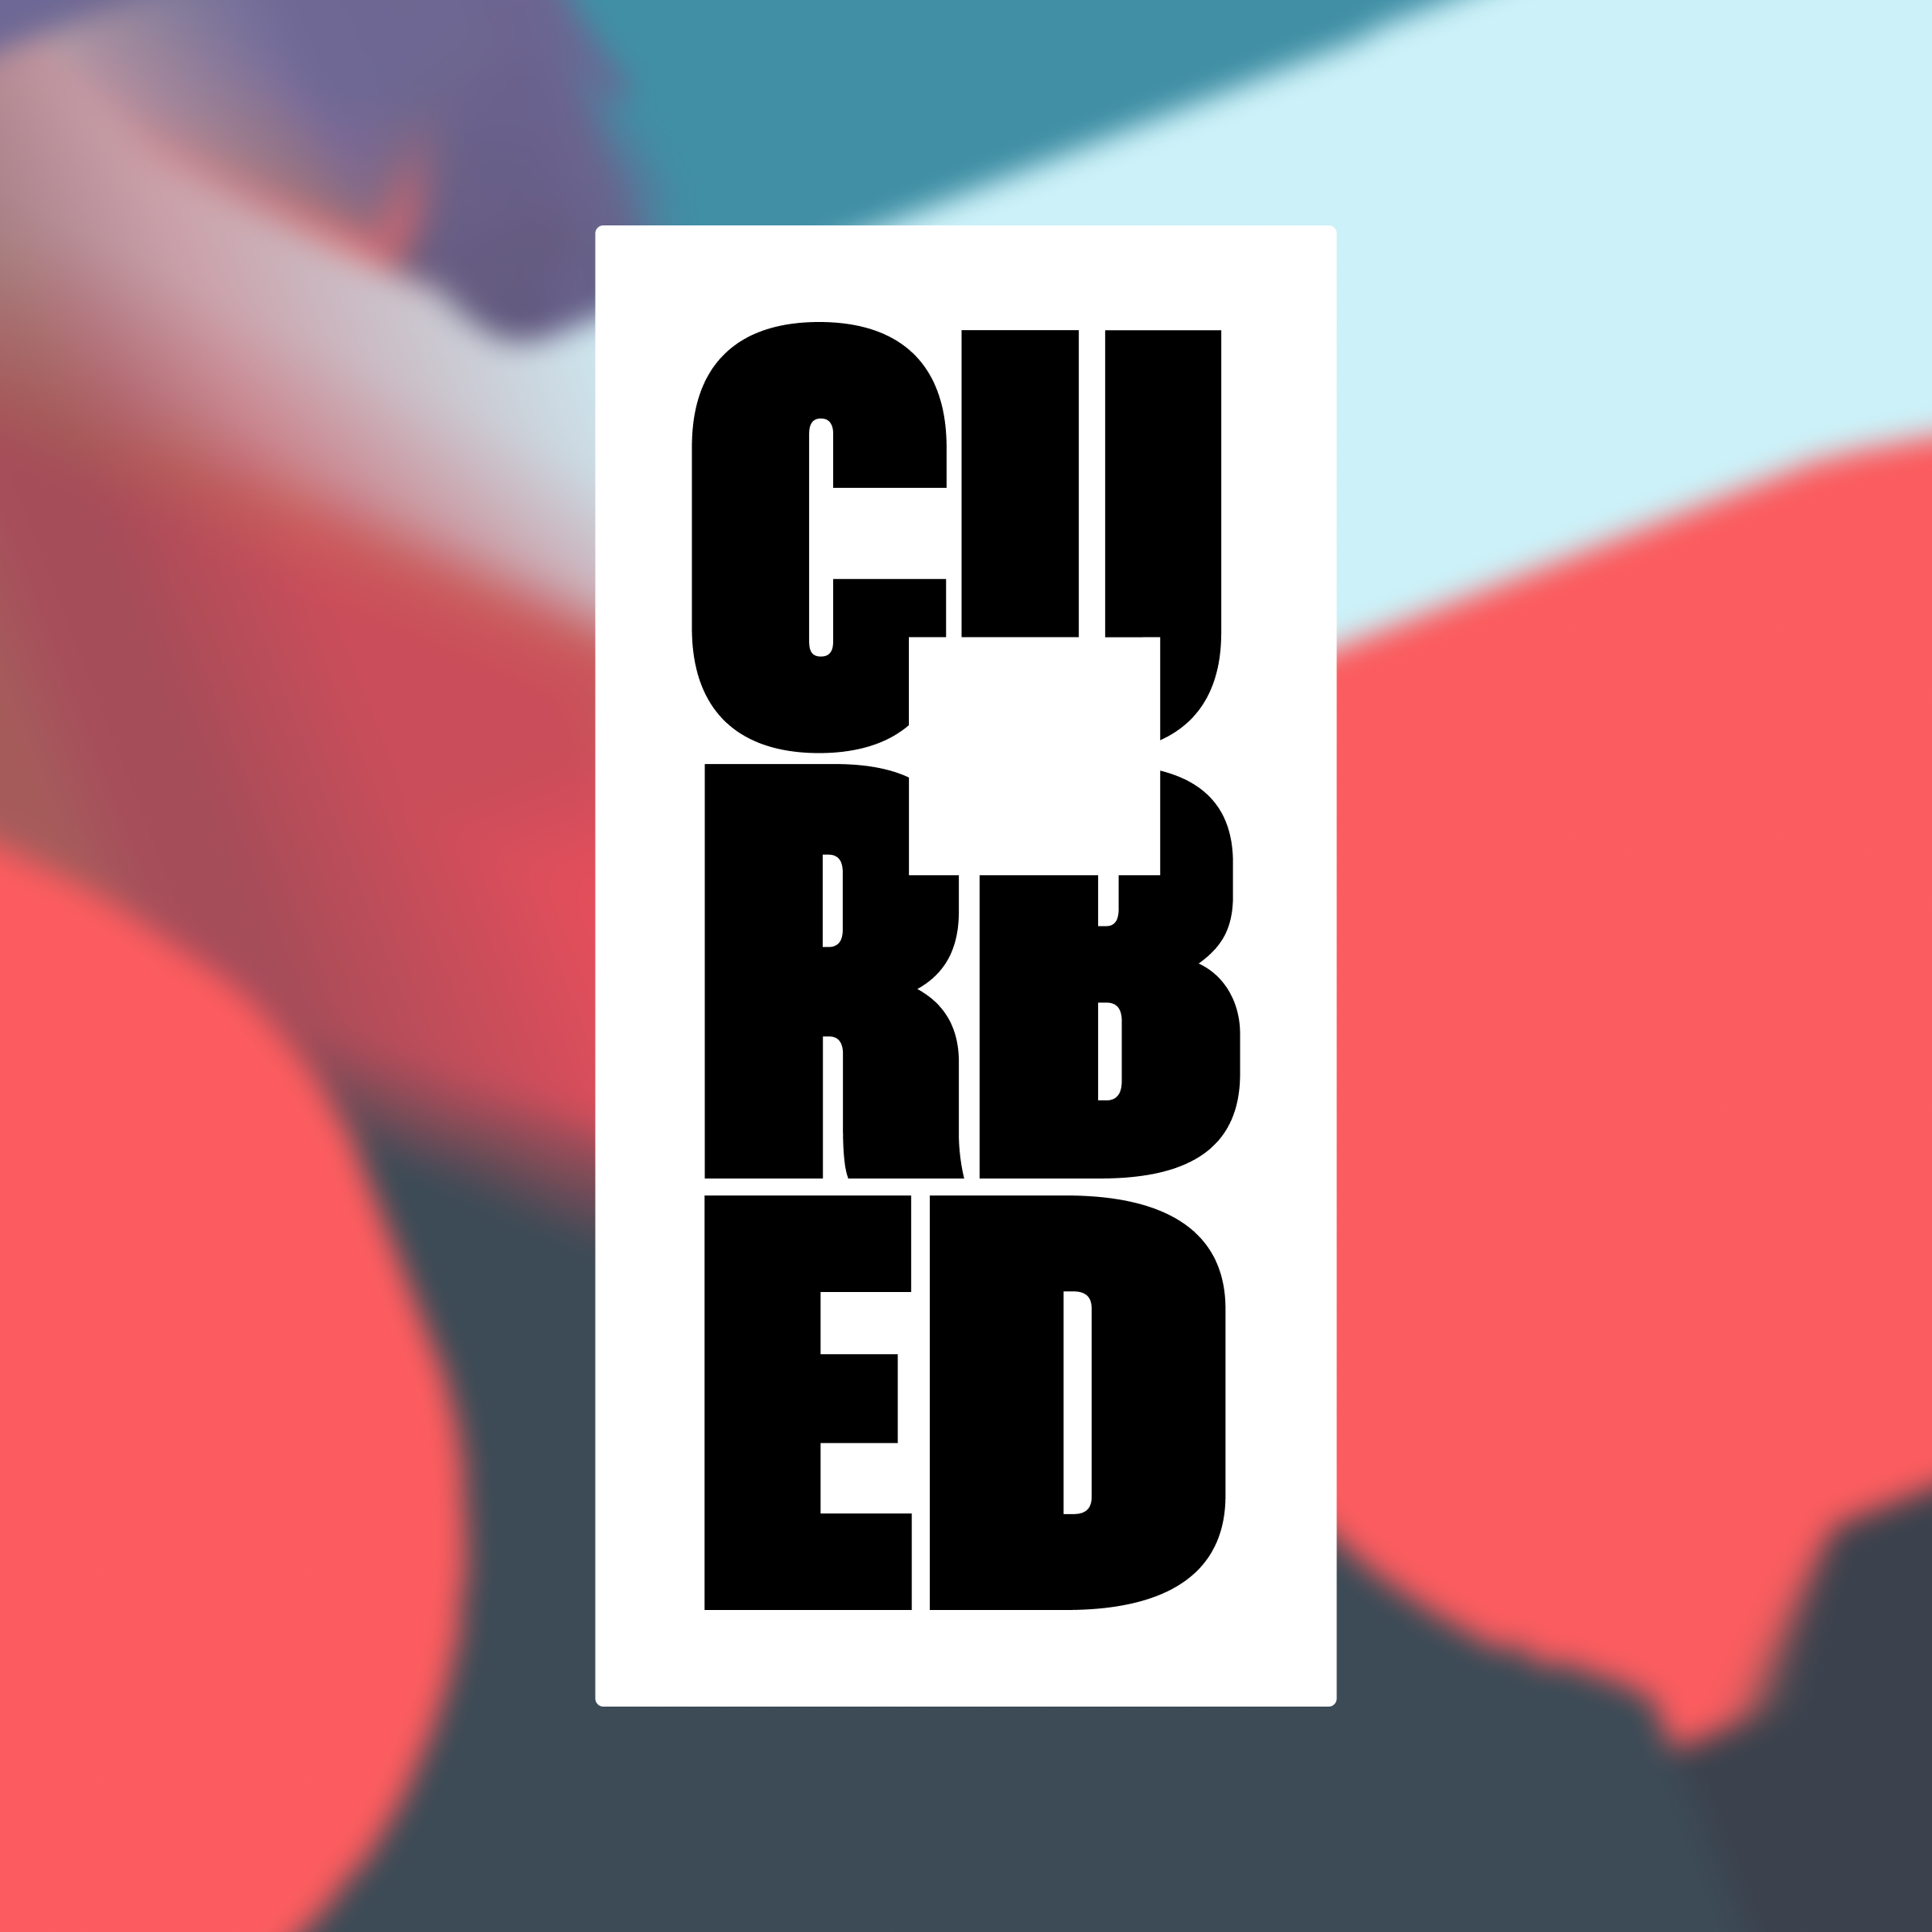 Logo of Curbed against an abstract painted background